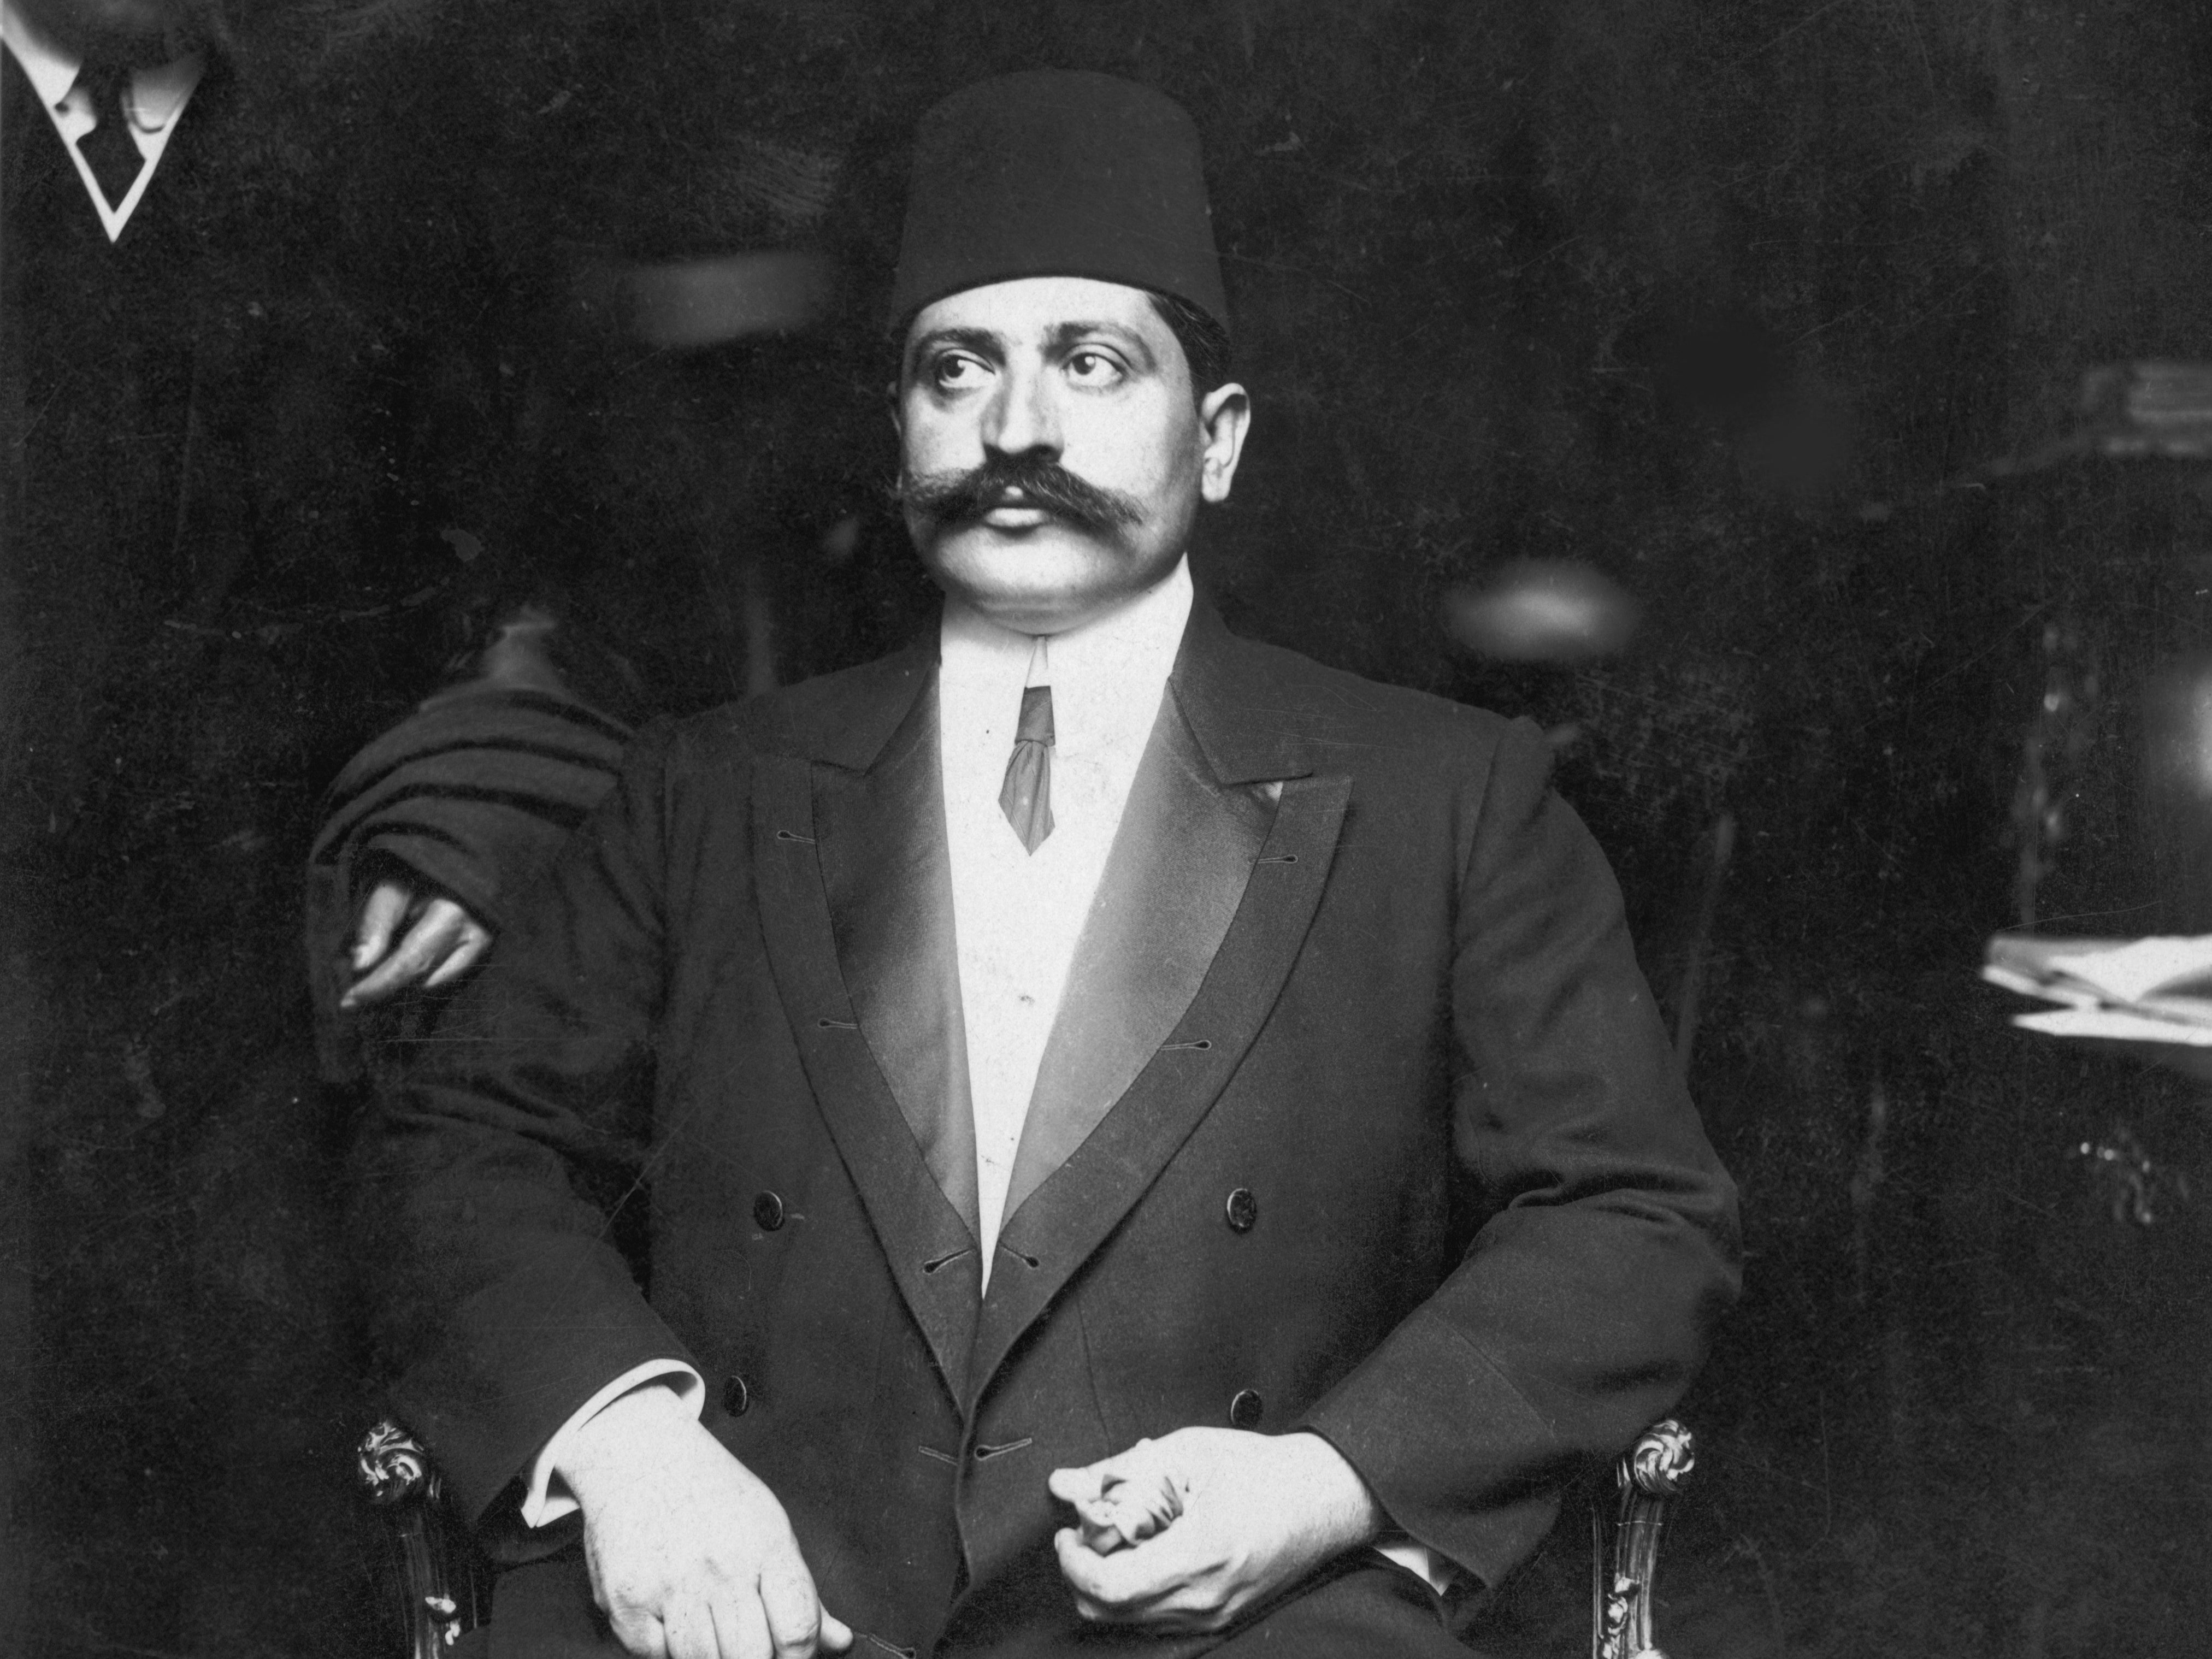 As the Ottoman empire’s minister of the interior, Mehmet Talaat Pasha was largely responsible for the genocide of the Armenians in Turkey in 1915